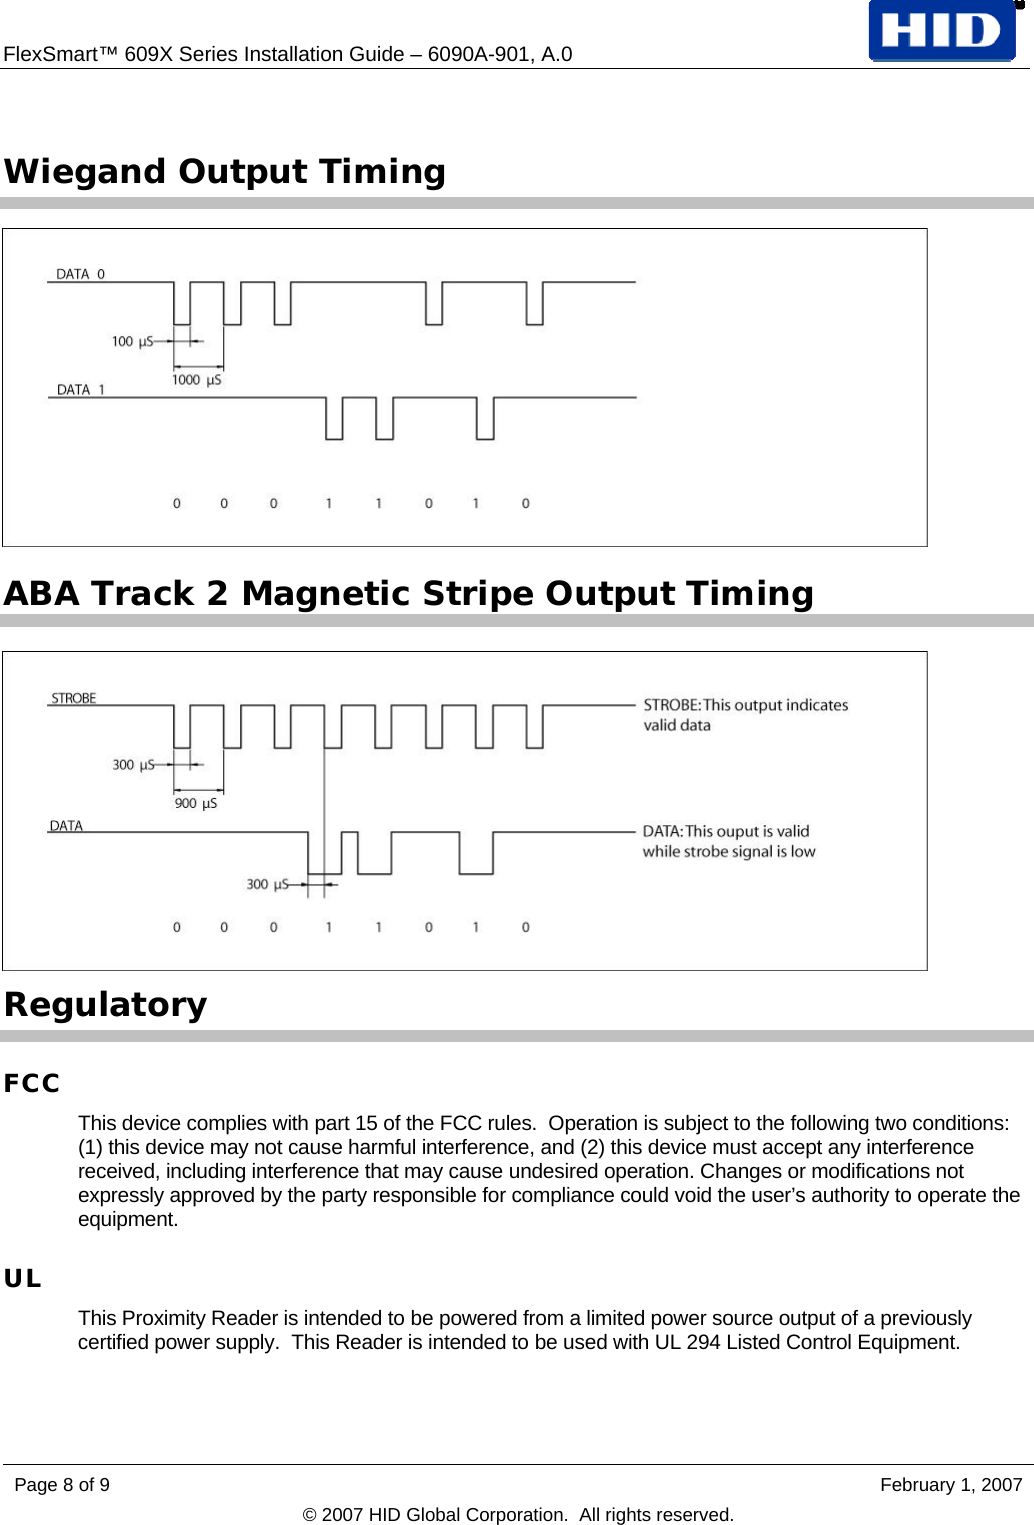 FlexSmart™ 609X Series Installation Guide – 6090A-901, A.0    Wiegand Output Timing  ABA Track 2 Magnetic Stripe Output Timing  Regulatory FCC This device complies with part 15 of the FCC rules.  Operation is subject to the following two conditions: (1) this device may not cause harmful interference, and (2) this device must accept any interference received, including interference that may cause undesired operation. Changes or modifications not expressly approved by the party responsible for compliance could void the user’s authority to operate the equipment. UL This Proximity Reader is intended to be powered from a limited power source output of a previously certified power supply.  This Reader is intended to be used with UL 294 Listed Control Equipment. Page 8 of 9    February 1, 2007 © 2007 HID Global Corporation.  All rights reserved.  